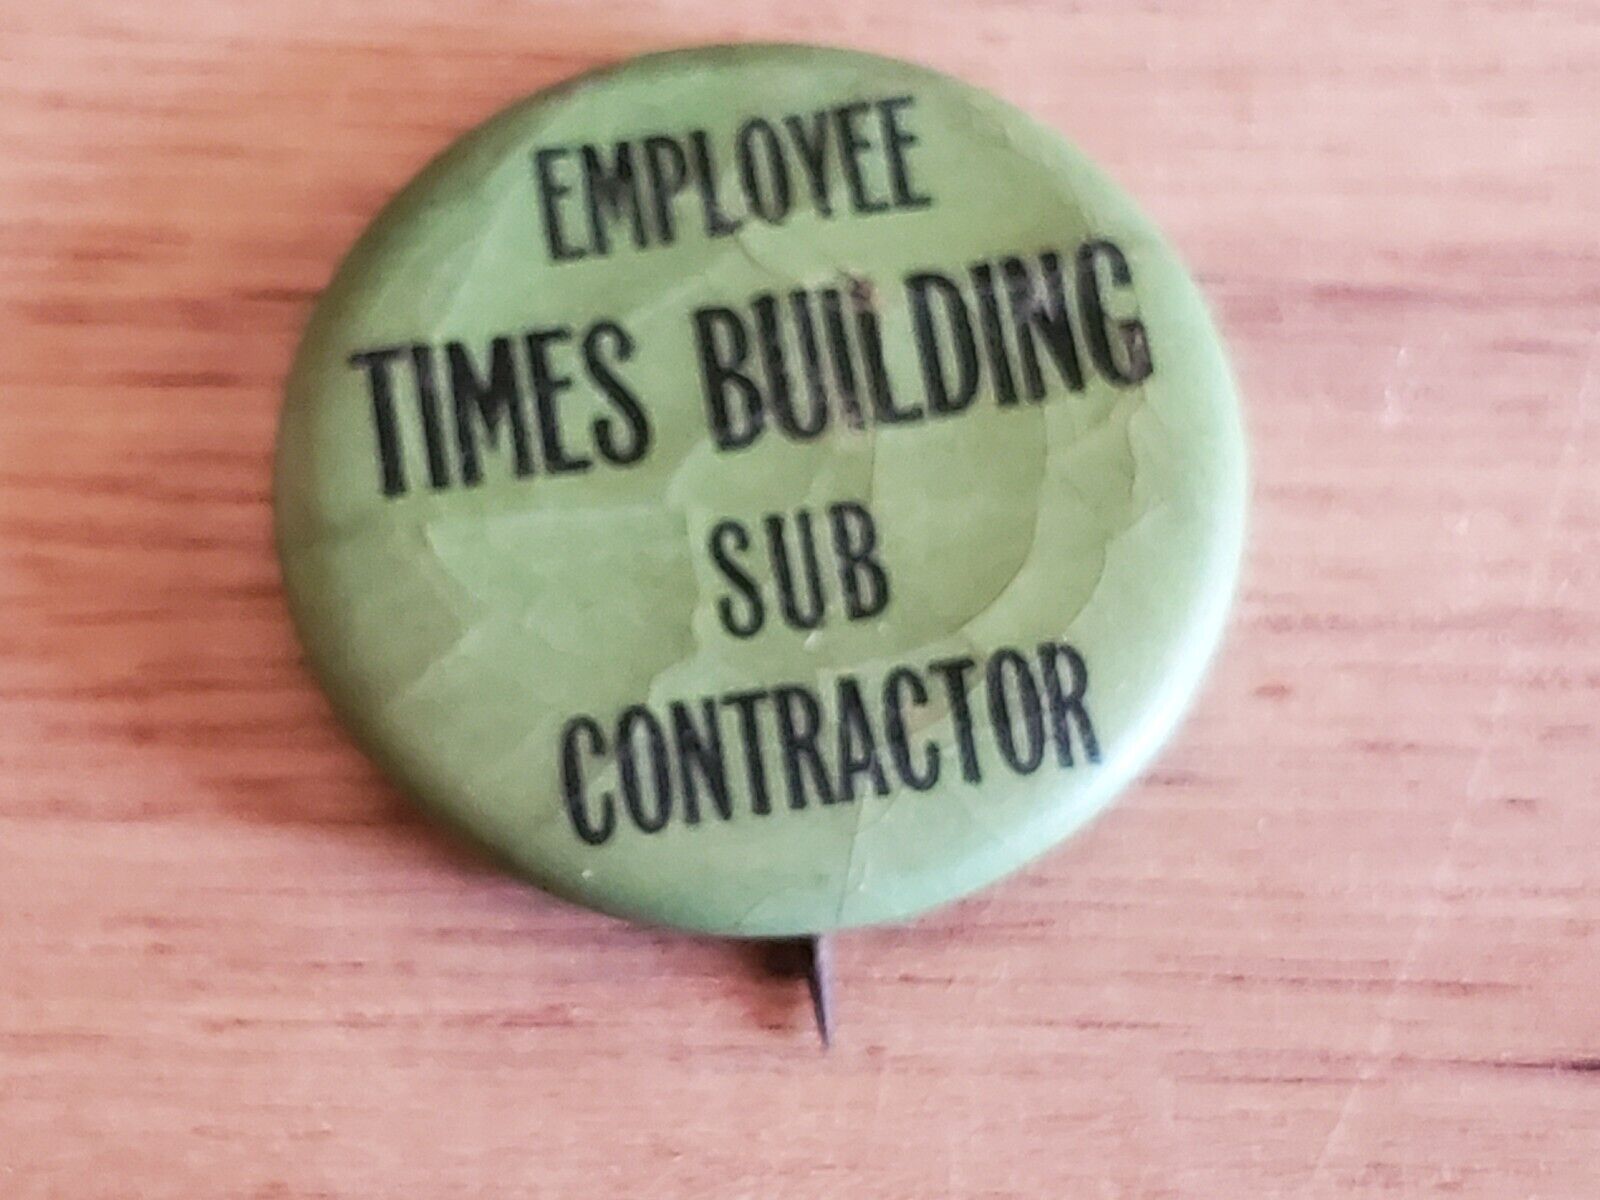 RARE Employee NY Times Building Sub Contractor ID Badge Button Pin Pinback Vtg